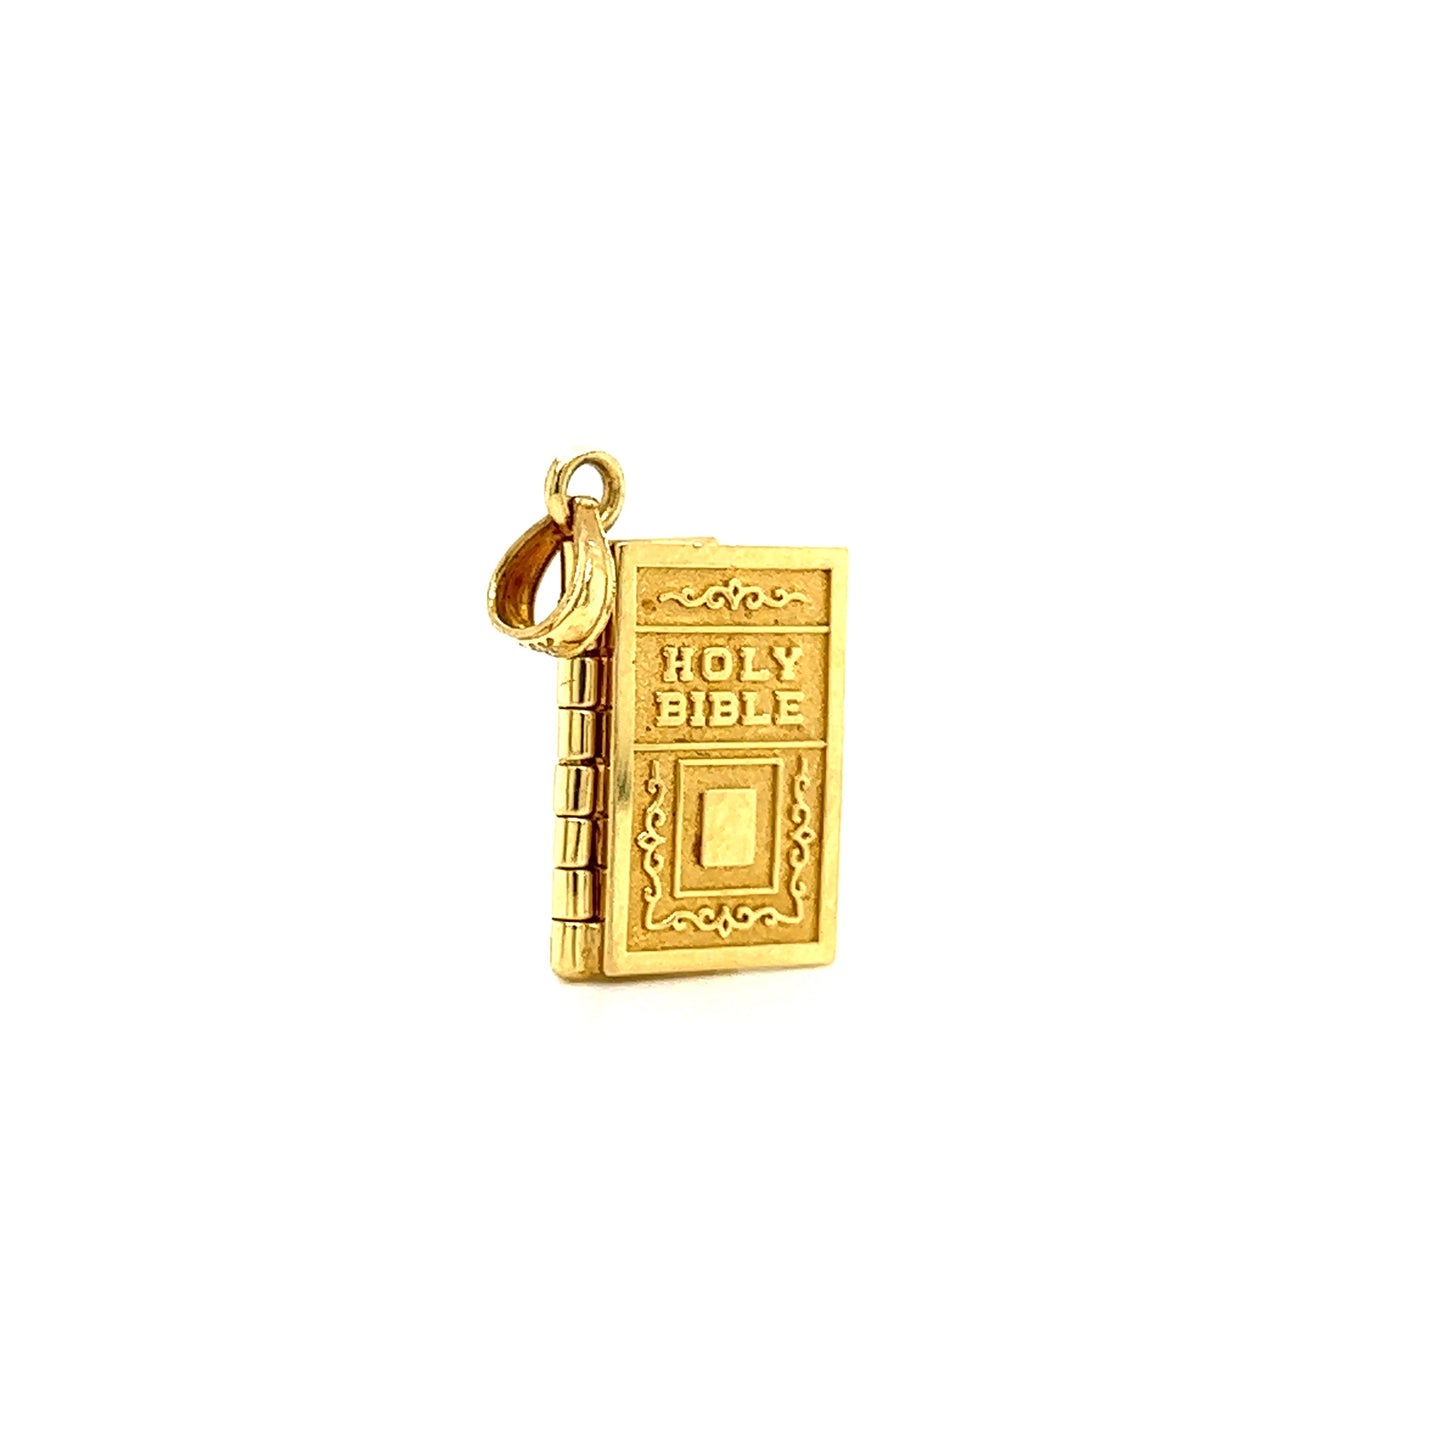 Bible Charm with 3D Lord's Prayer pages in 14K Yellow Gold Standing